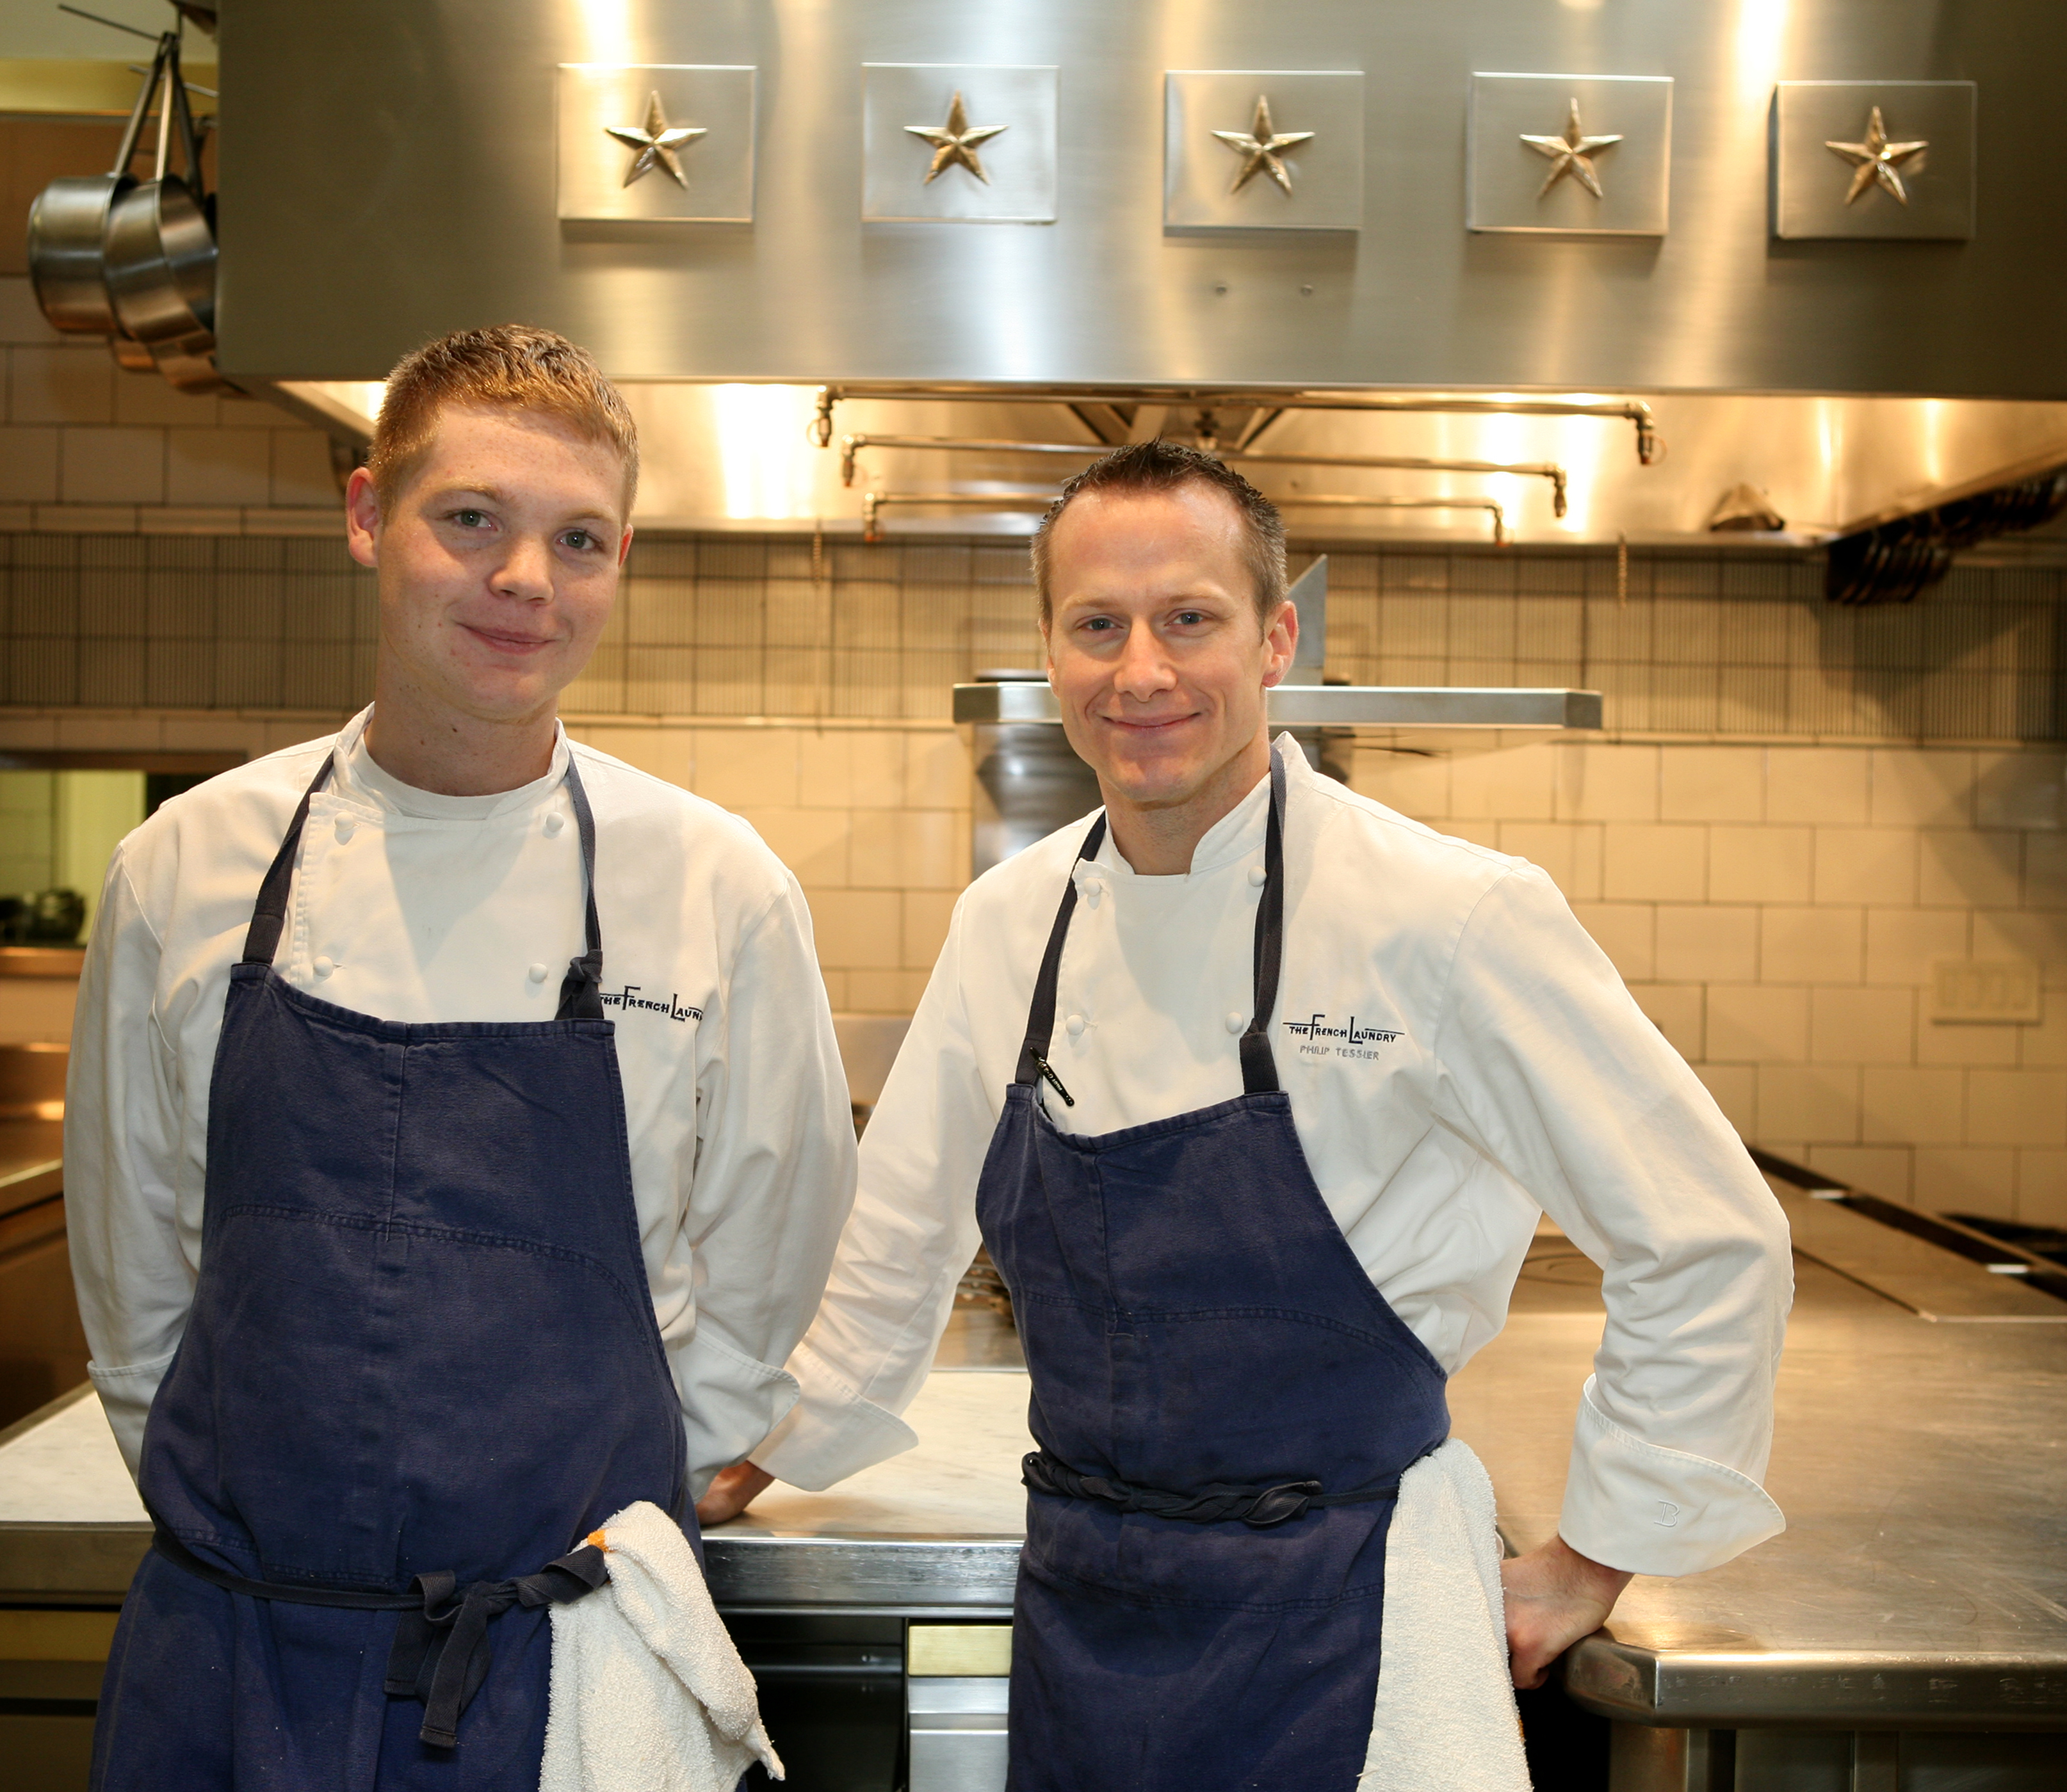 Skylar Stover (L) and Philip Tessier (R) will compete on Jan. 27 in the celebrated Bocuse d'Or. (The ment’or BKB Foundation)